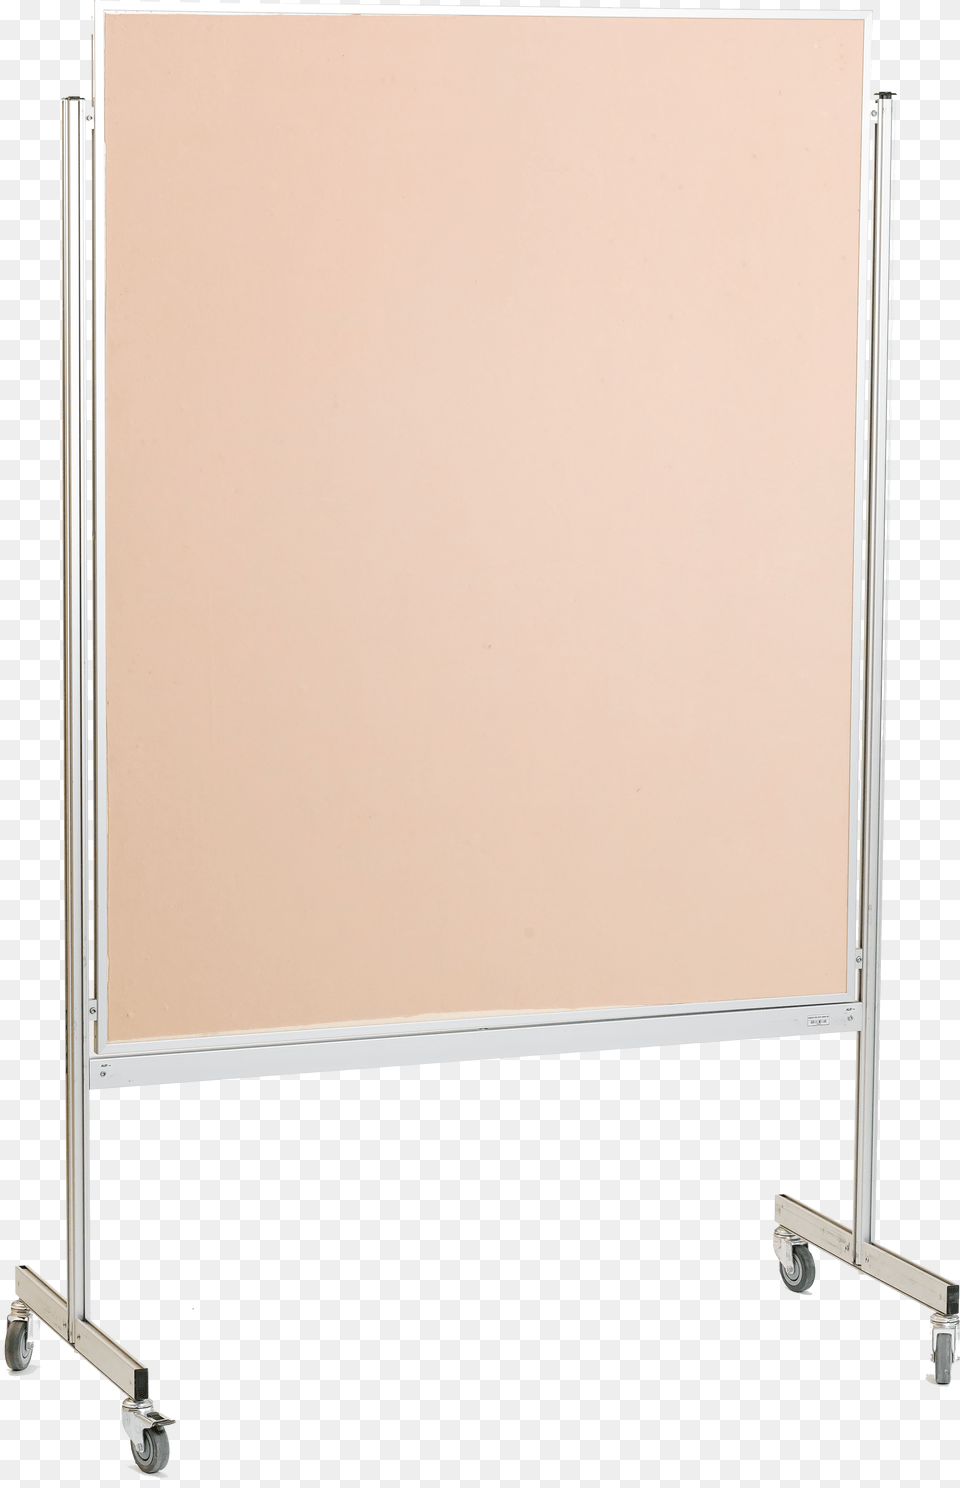 Projection Screen Download Projection Screen Free Png